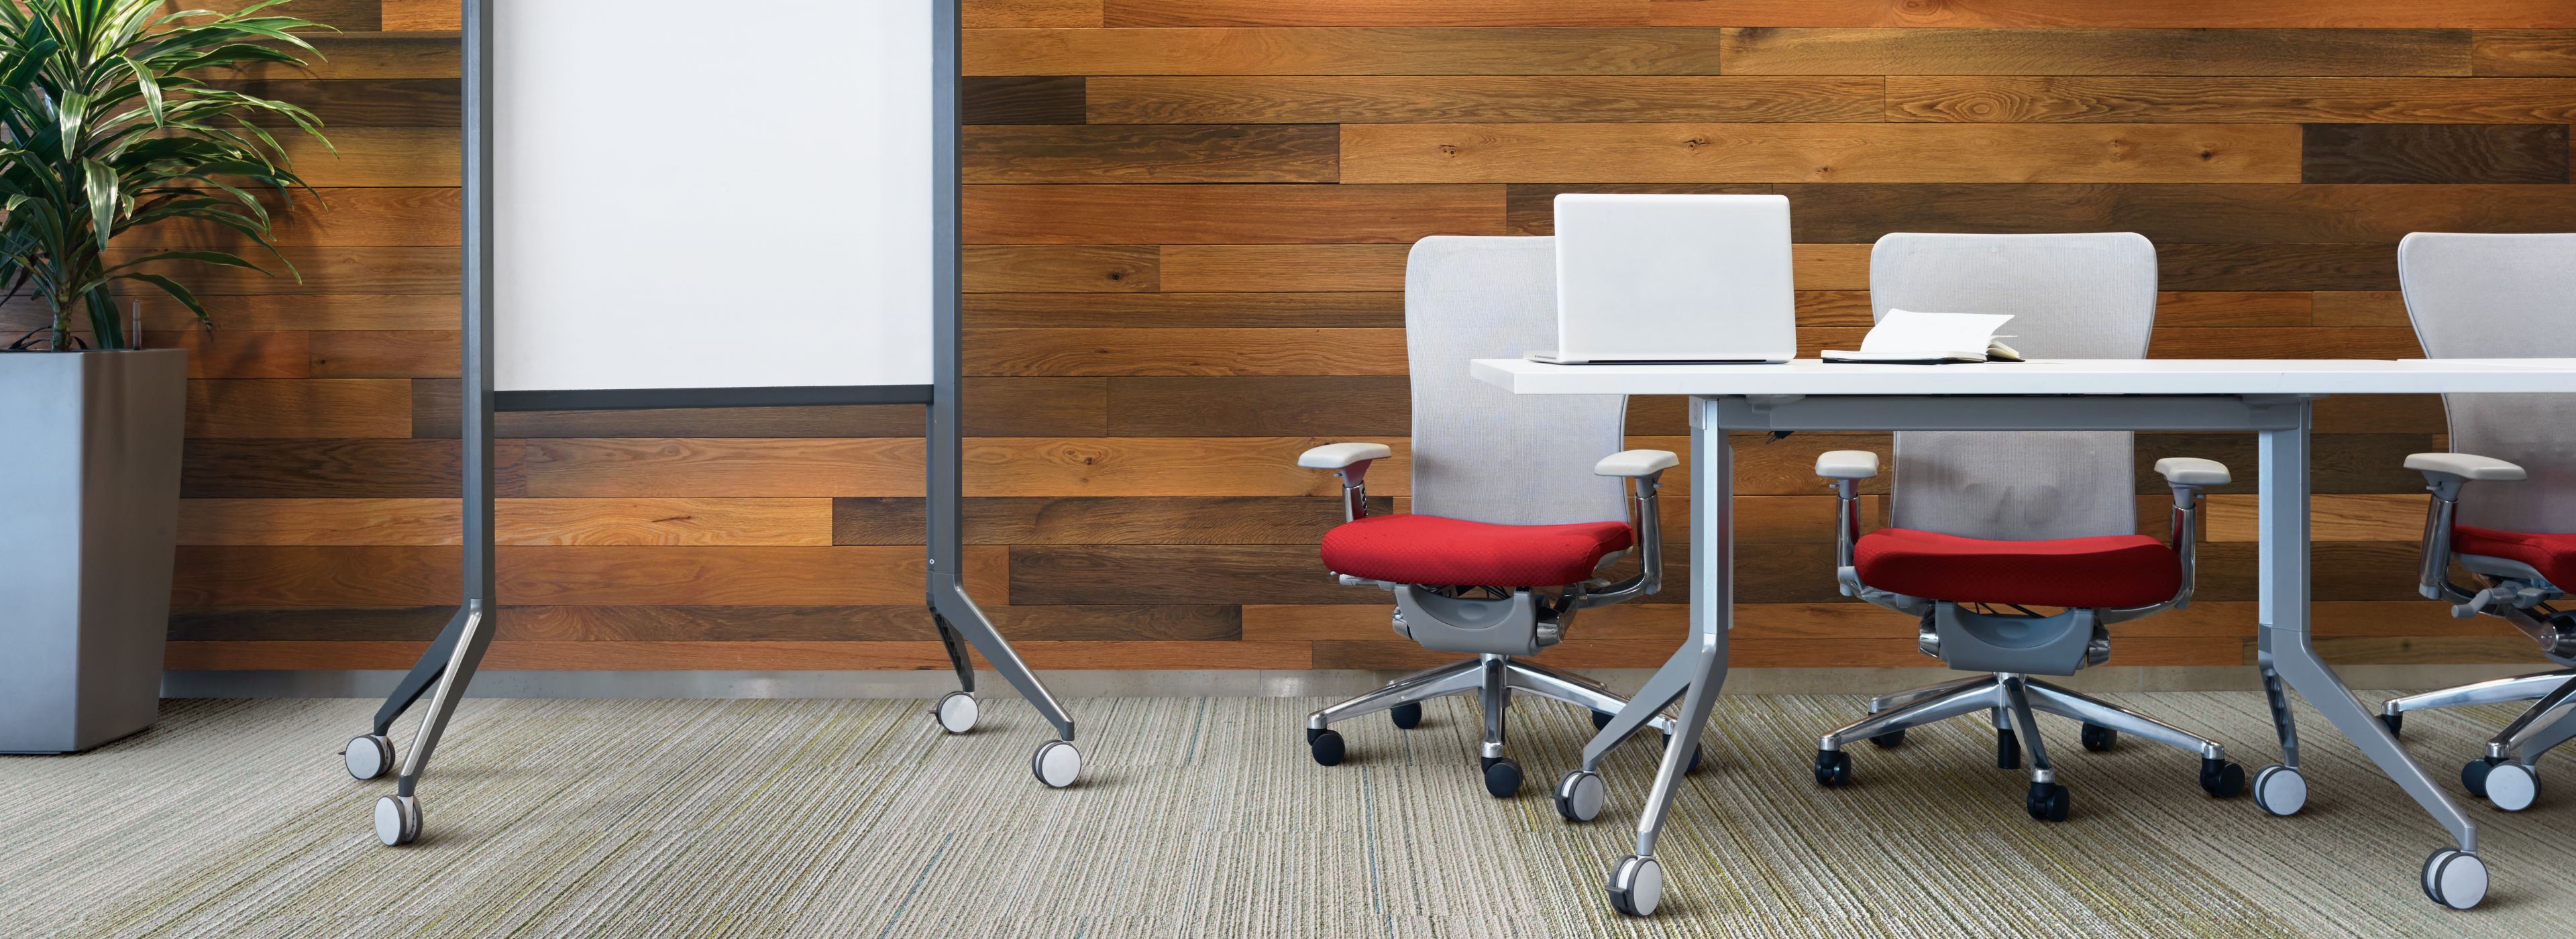 Interface SL920 plank carpet tile in meeting area with conference tables, chairs, white board and plant image number 1